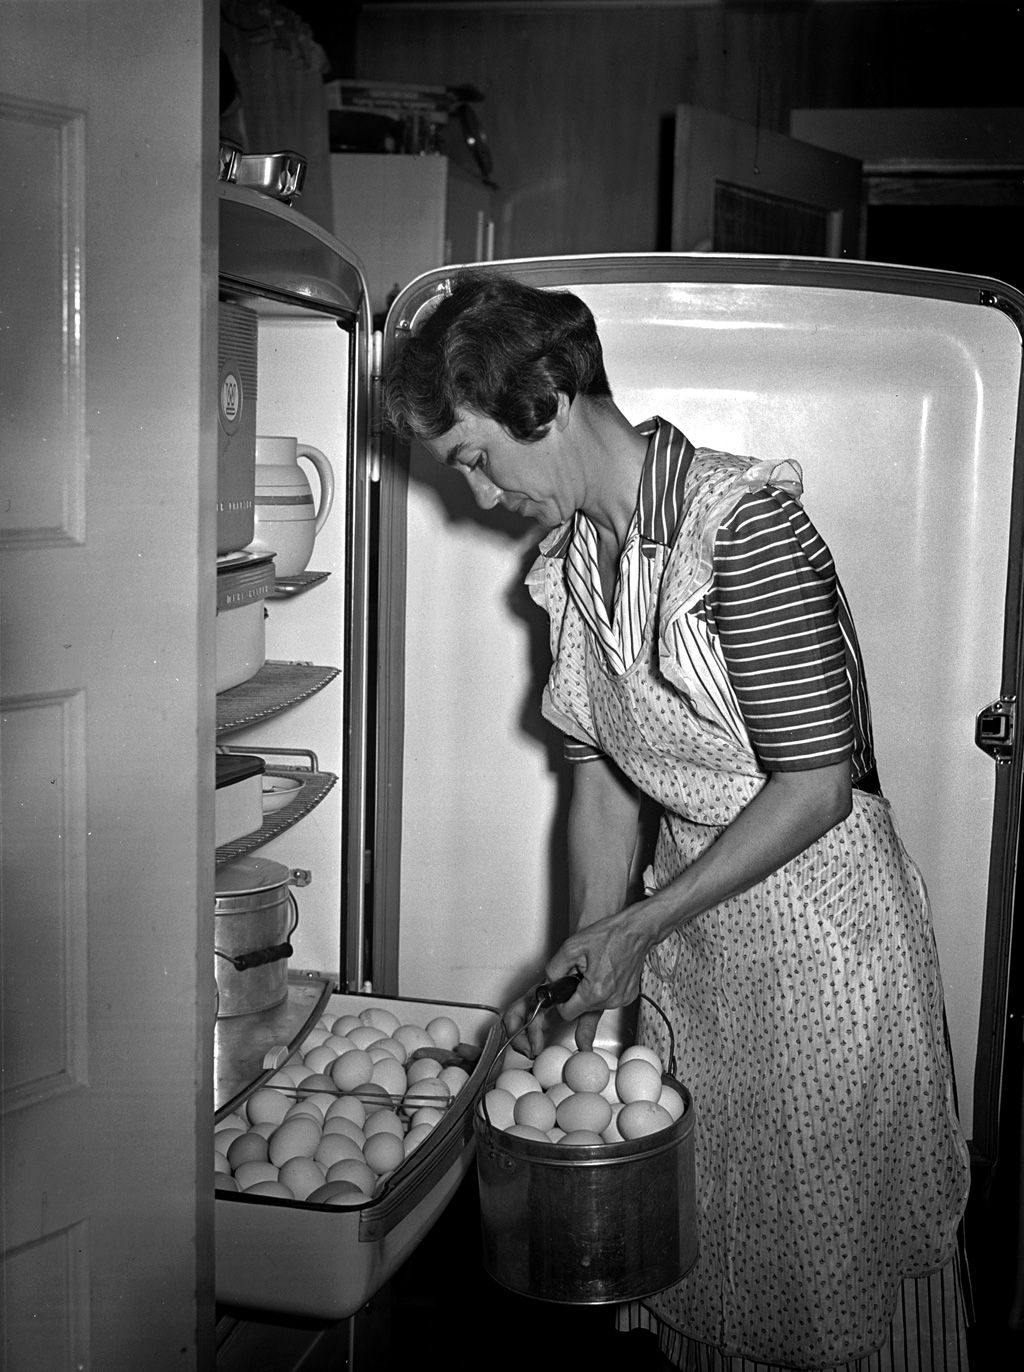 An electric refrigerator helps Mrs. Case keep her eggs fresh in Lauderdale County, Alabama. This photograph for the Tennessee Valley Authority was taken by Arthur Rothstein in June, 1942. View full size.